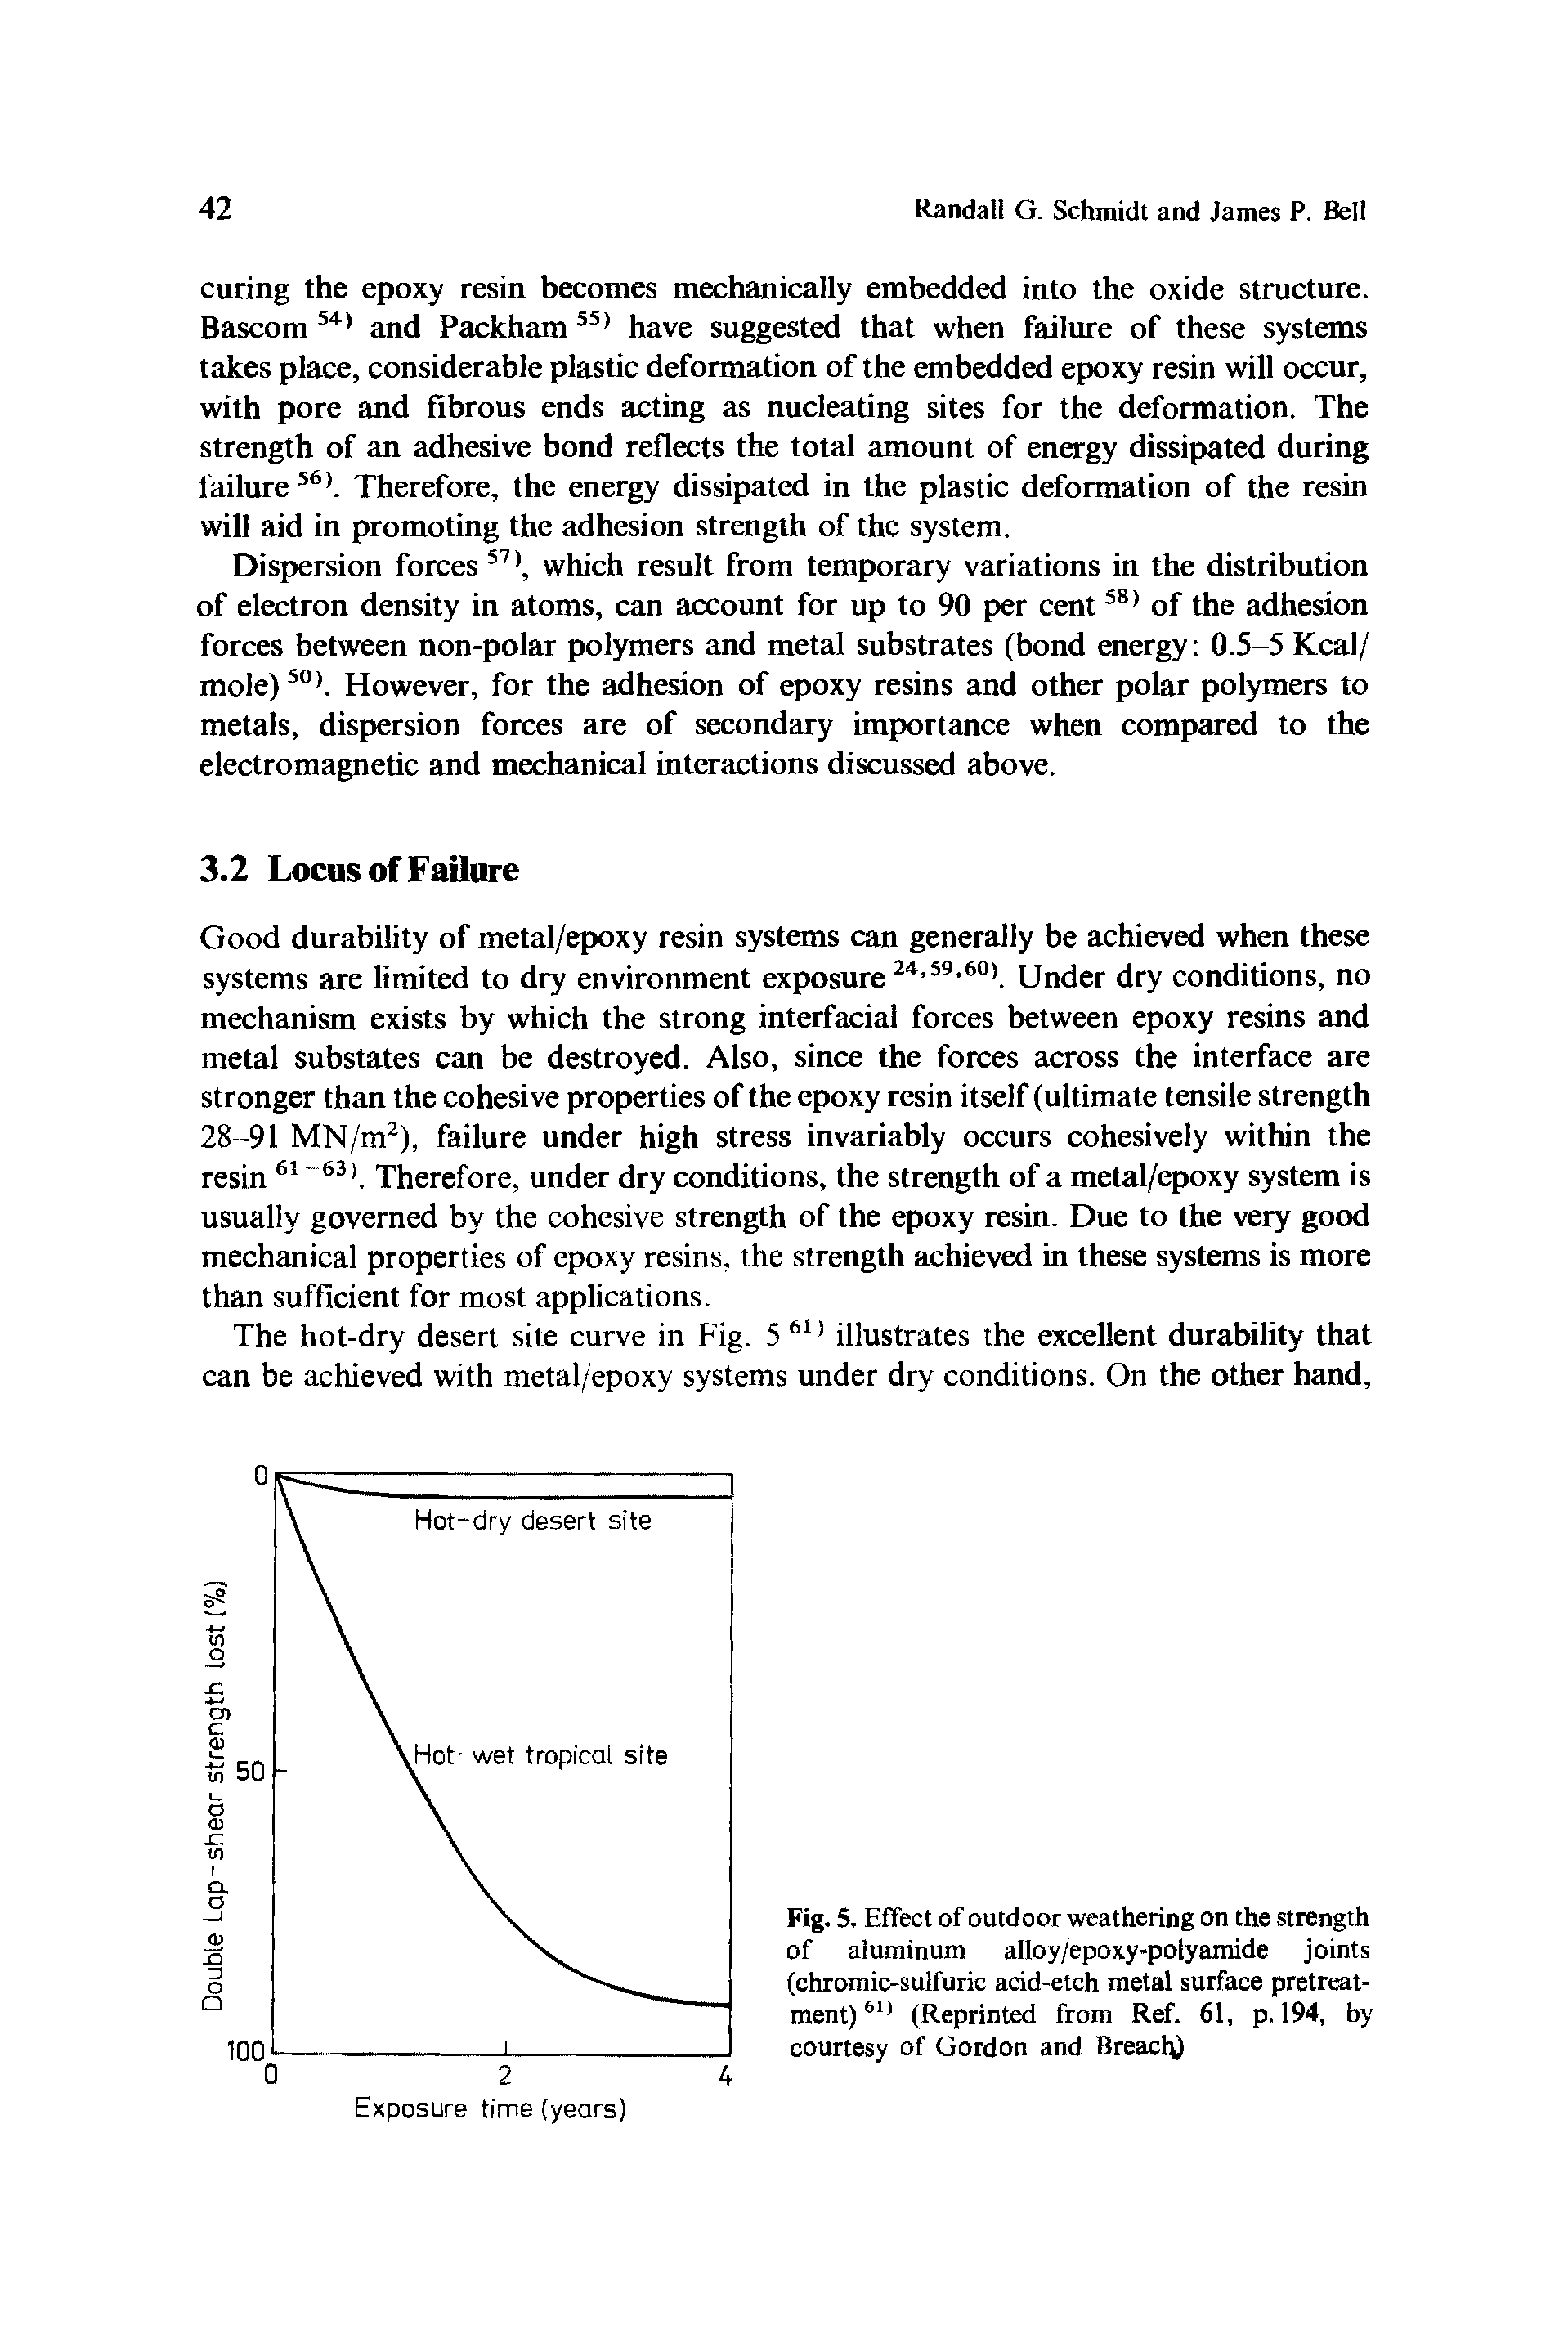 Fig. 5. Effect of outdoor weathering on the strength of aluminum alloy/epoxy-polyamide joints (chromic-sulfuric acid-etch metal surface pretreat-ment)61 (Reprinted from Ref. 61, p. 194, by courtesy of Gordon and Breach...